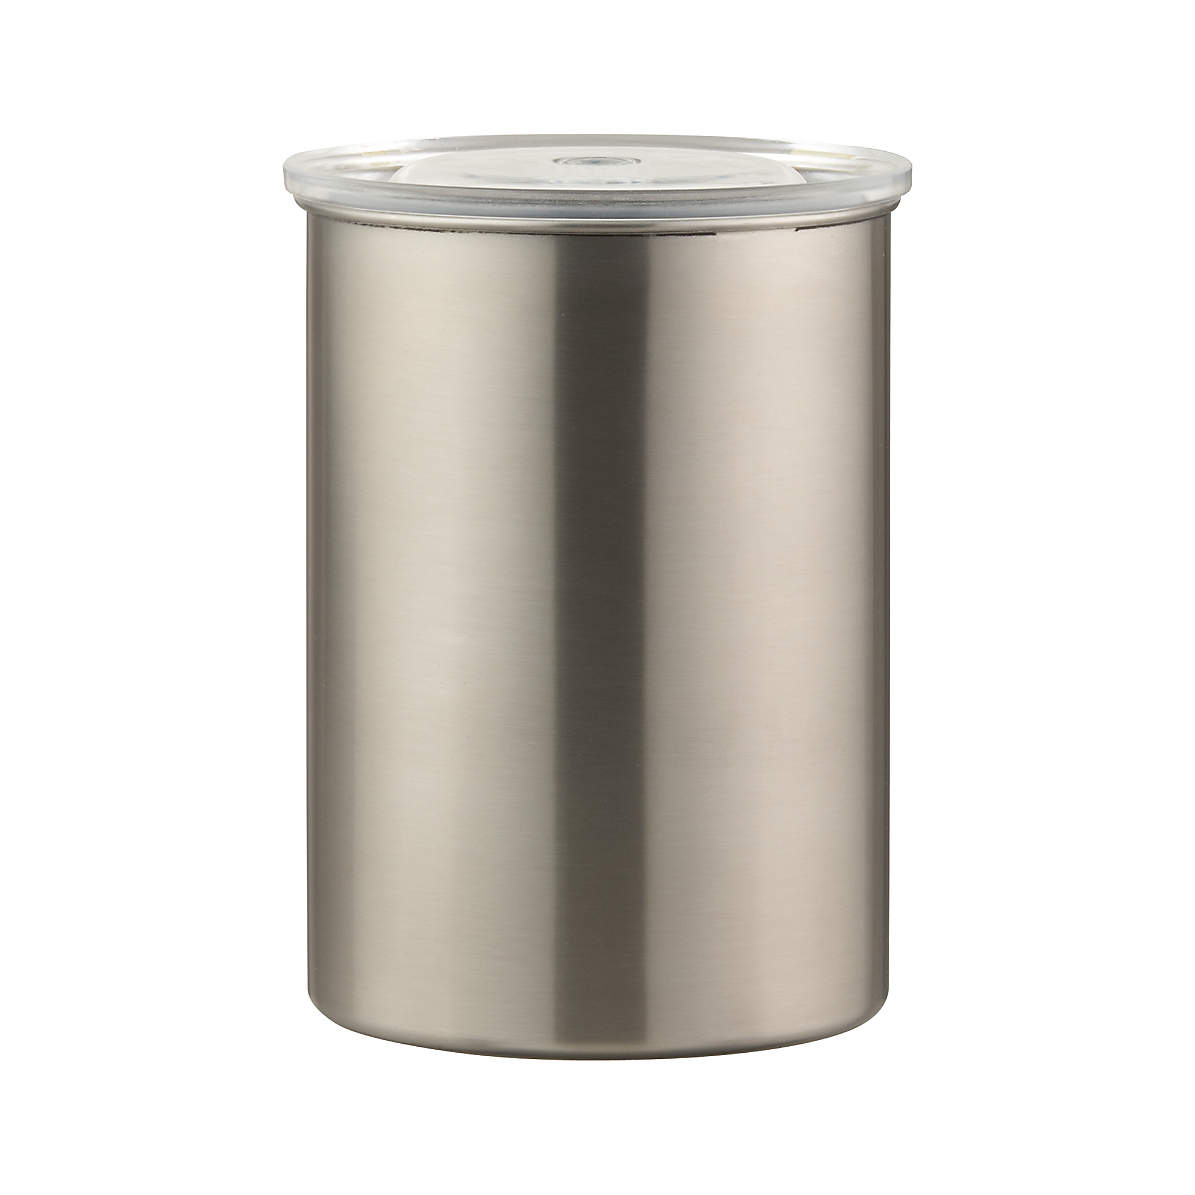 Oggi Brew 1.94 qt. Coffee Canister & Reviews